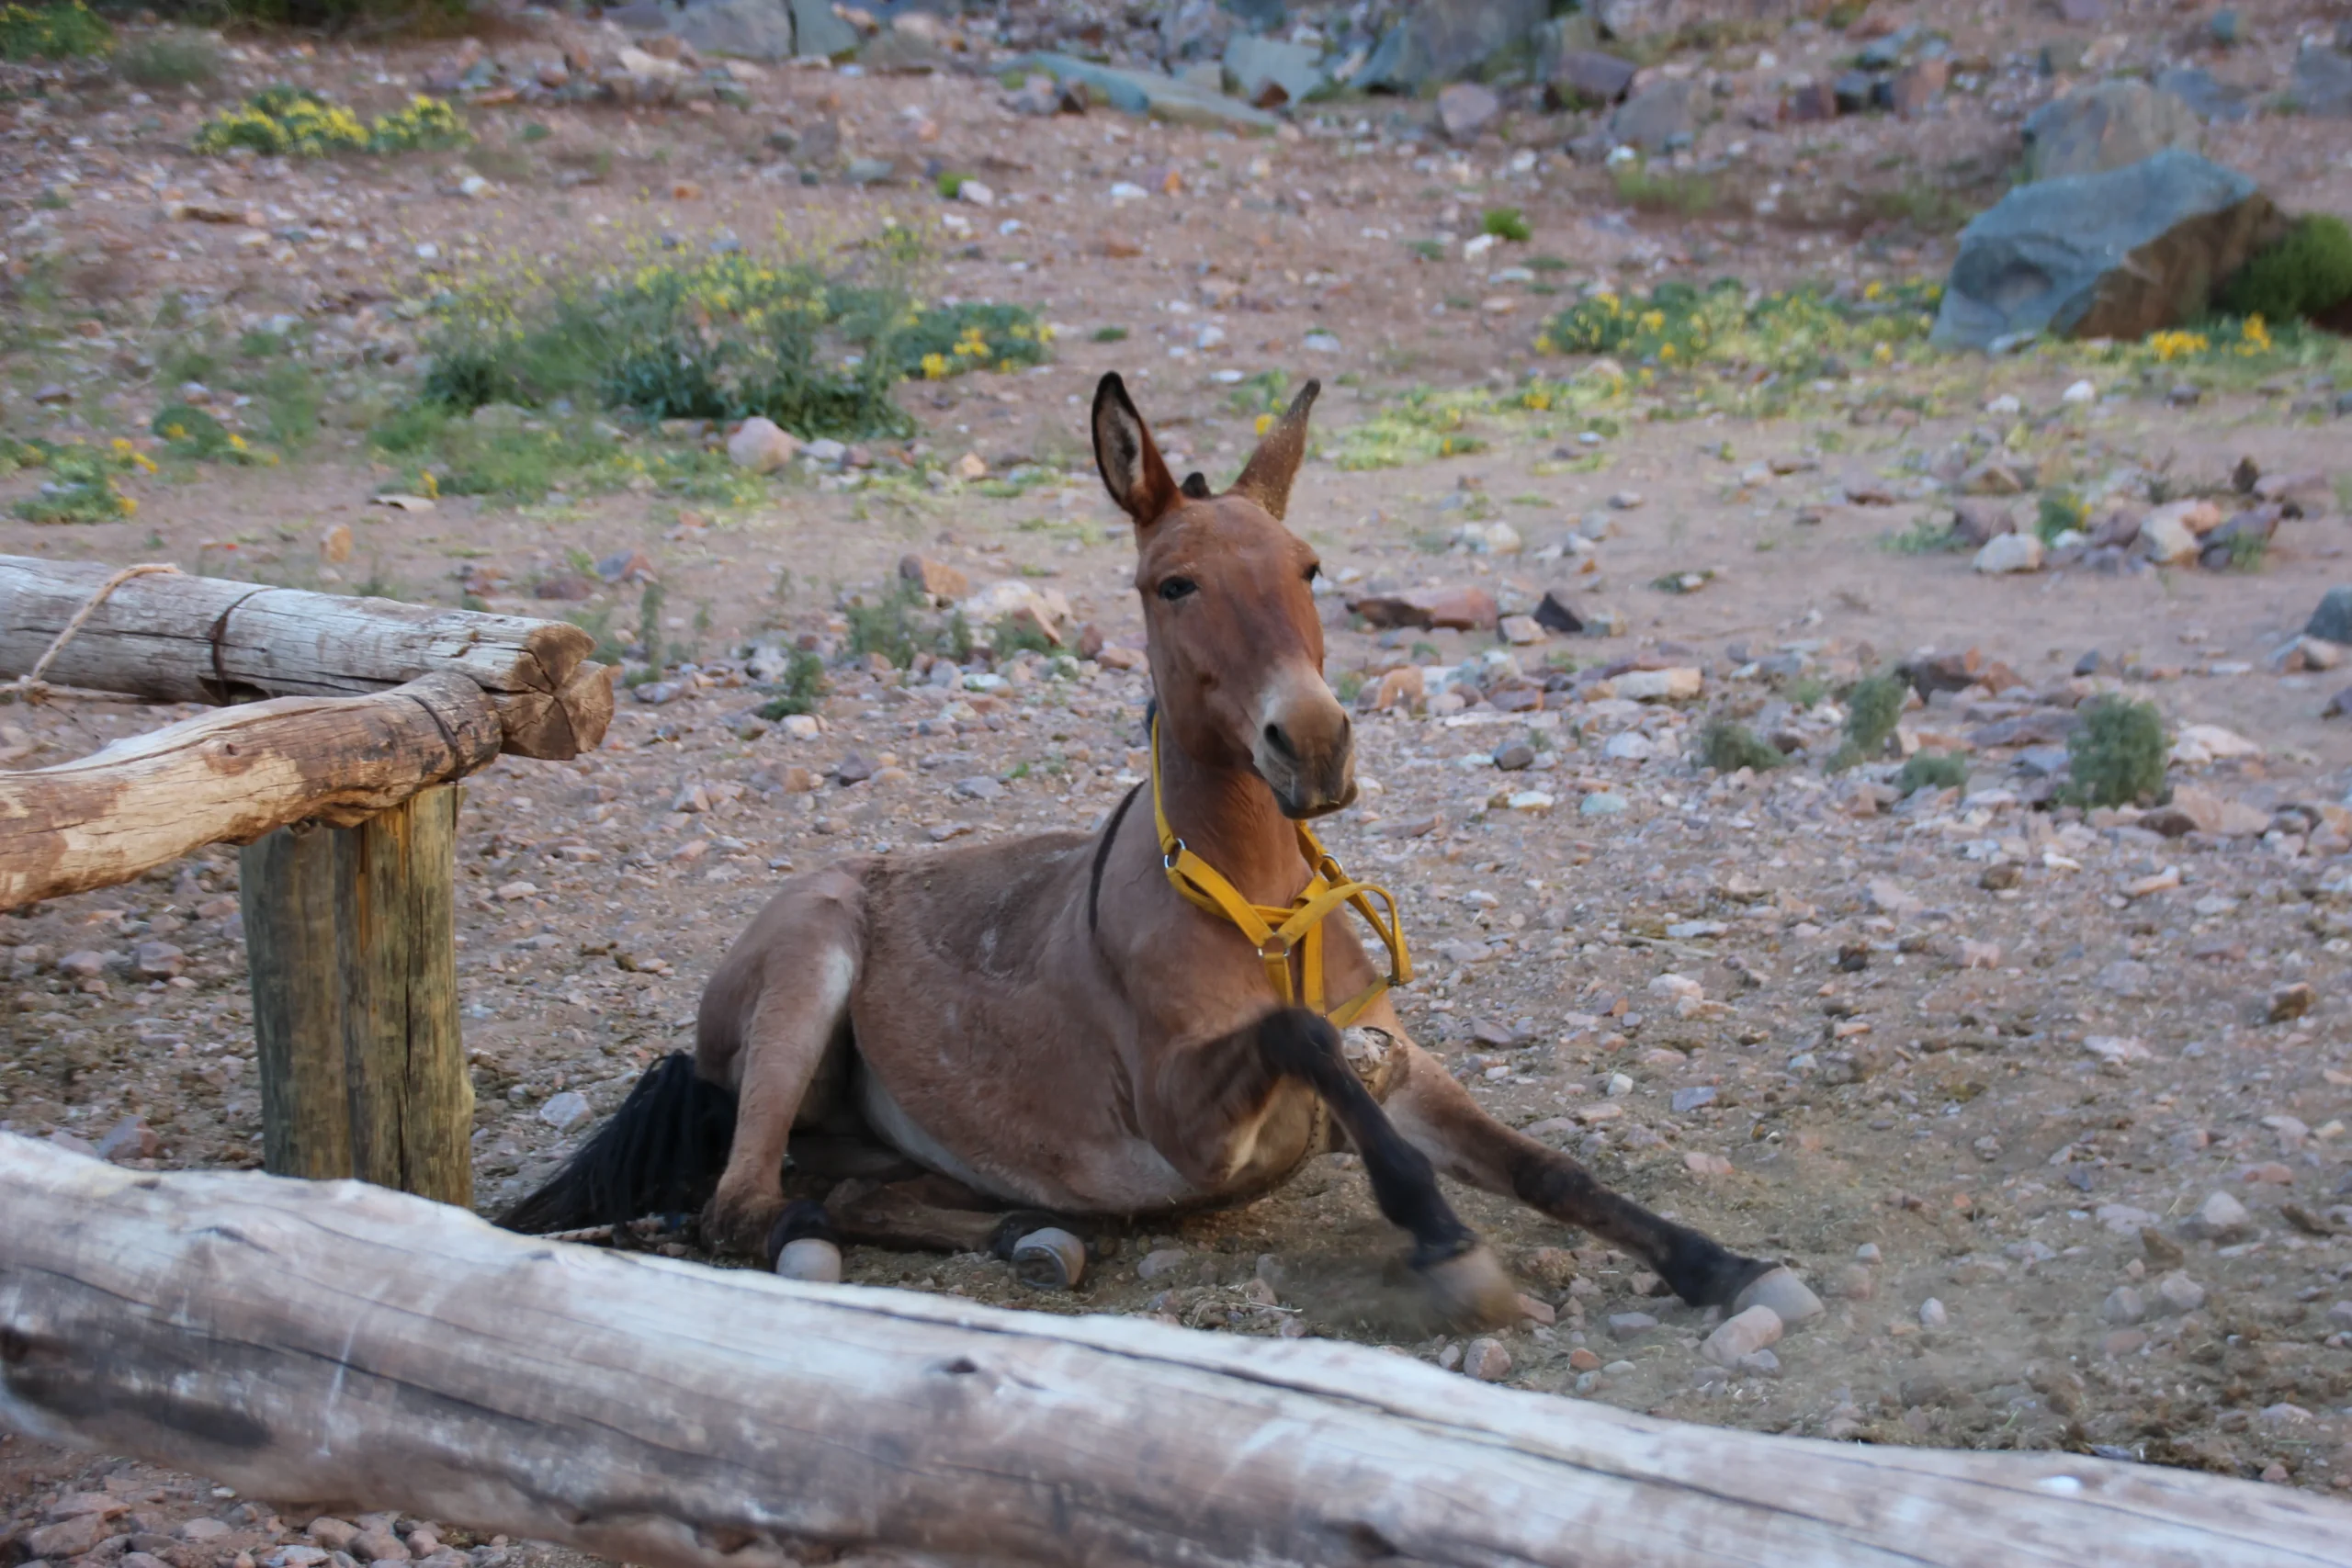 Mule laying down in dirt